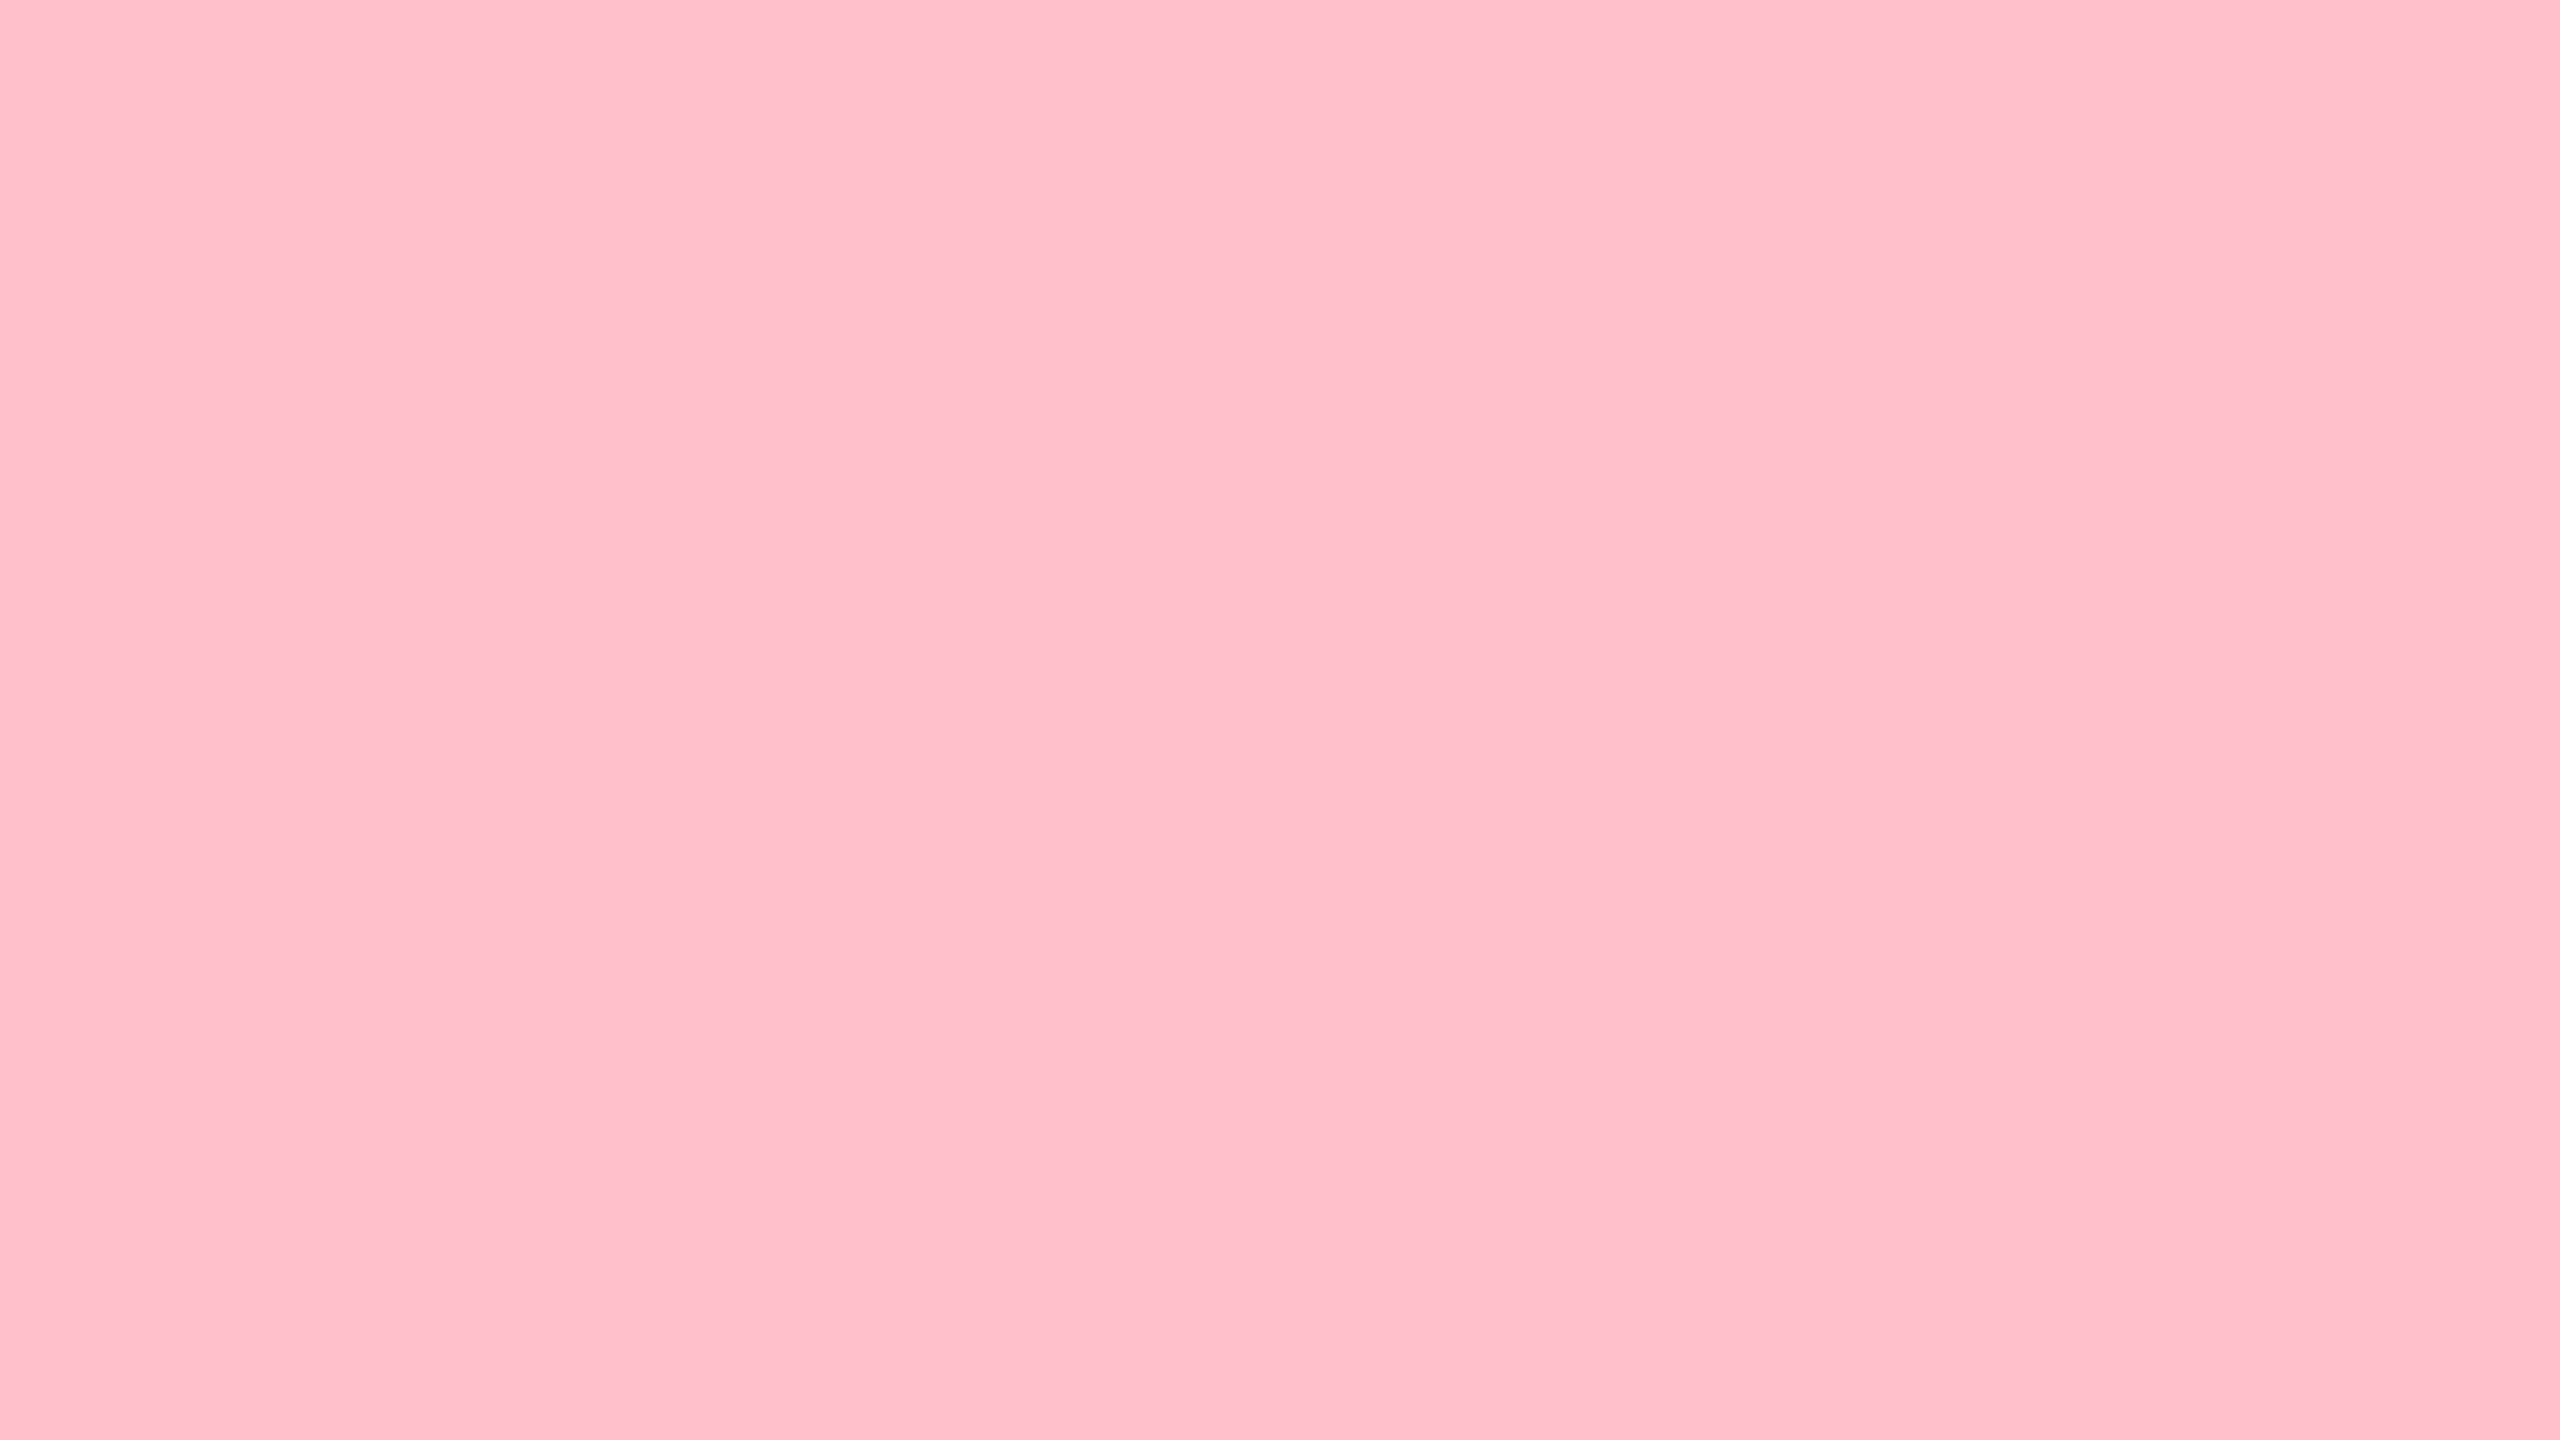 Pink Backgrounds Plain Wallpapers Cave Wallpaperaccess Solid.